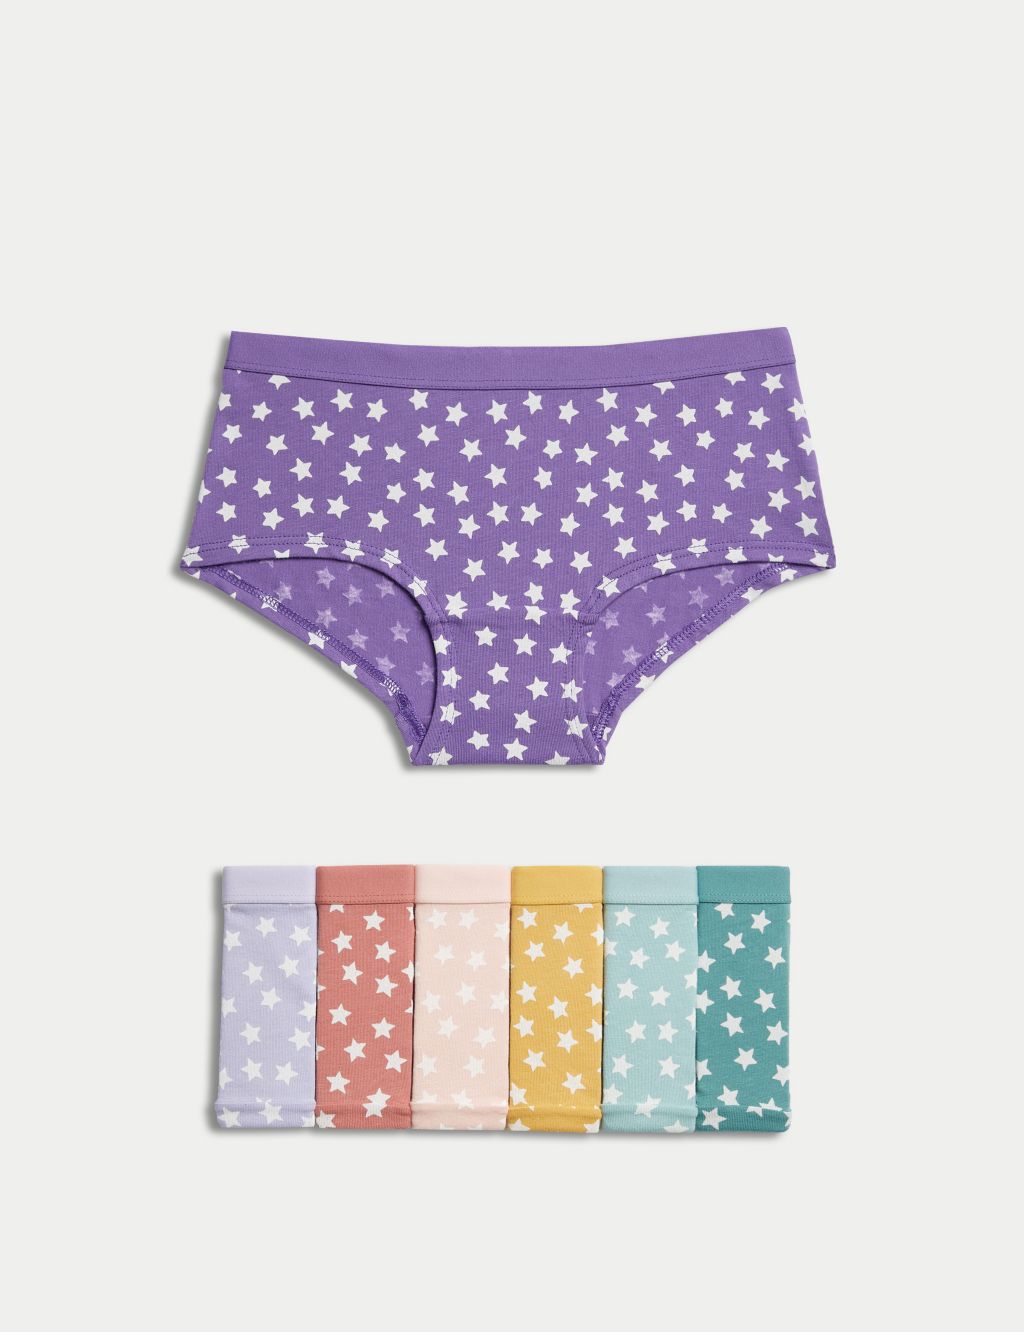  Boboking Teen Girls Panties Soft Briefs Big Kids Underwear  6years Mixed color: Clothing, Shoes & Jewelry